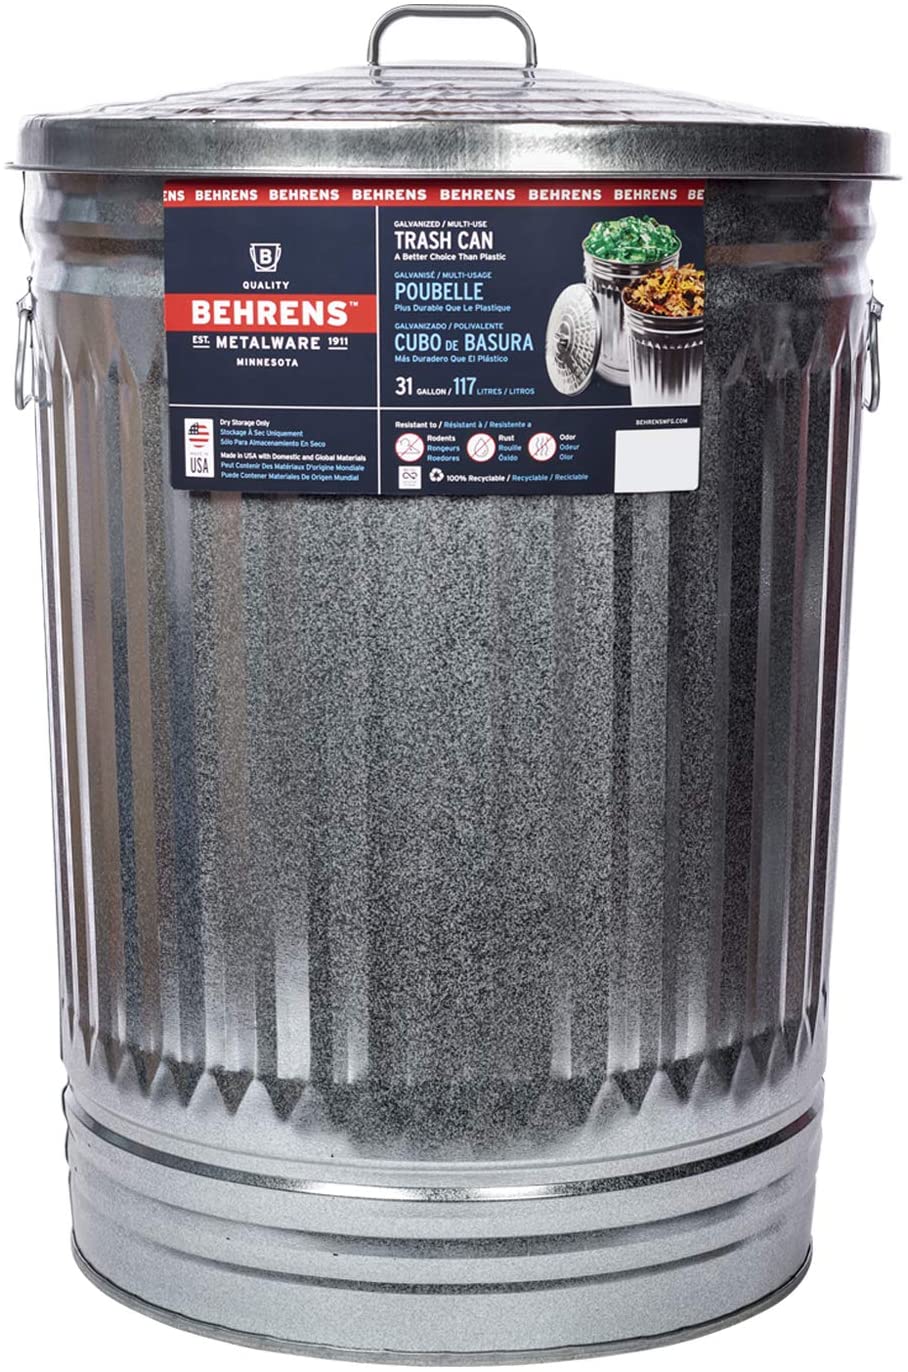 Behrens Recyclable Chemical-Free Steel Outdoor Trash Can, 31-Gallon